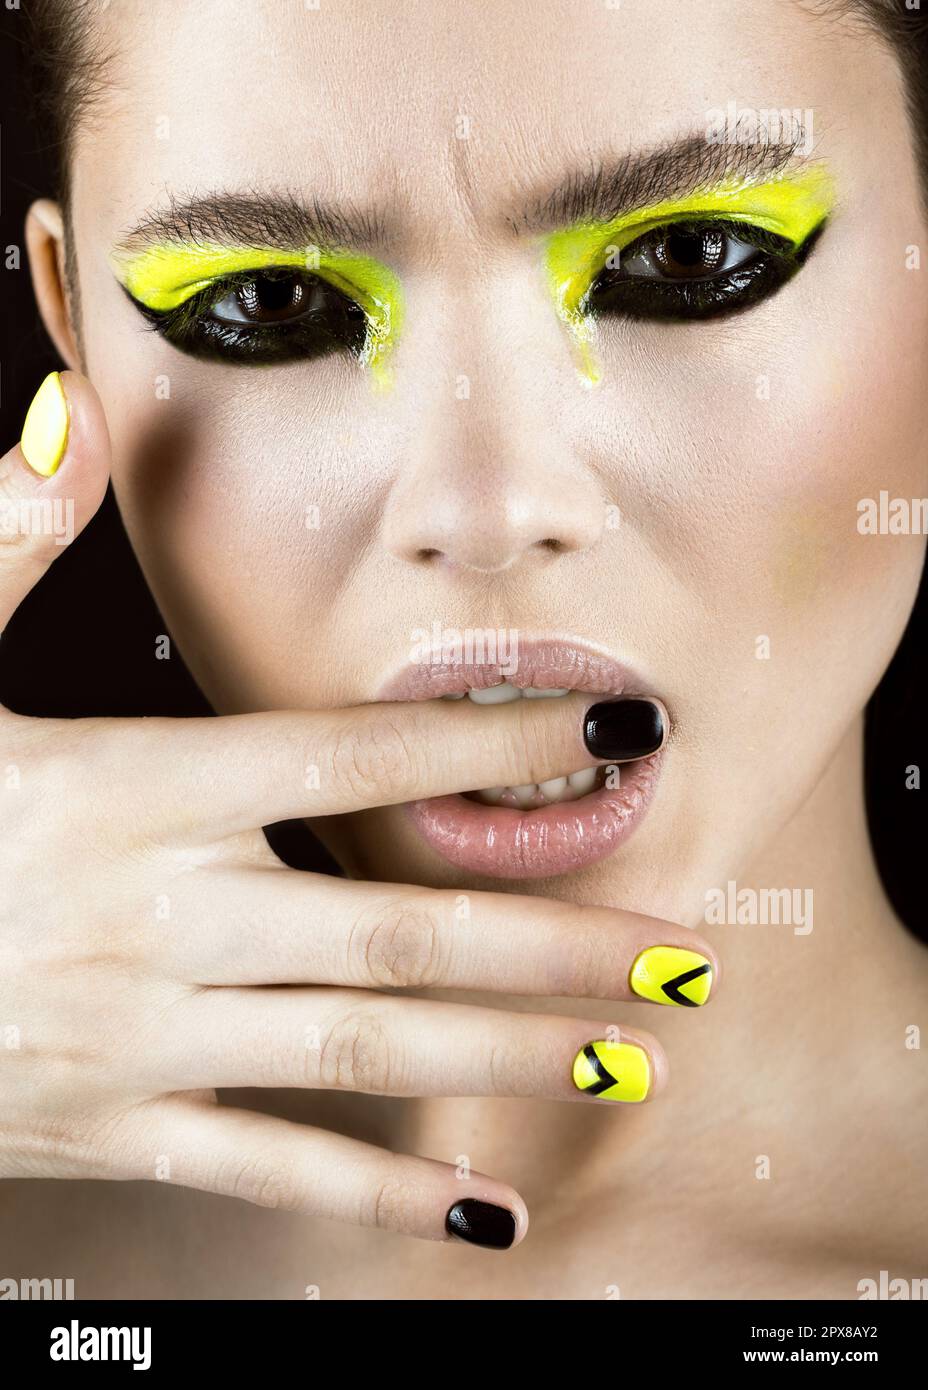 Close-up portrait of girl with yellow and black make-up, creative nail art disign. Beauty face. Photo shot in studio Stock Photo